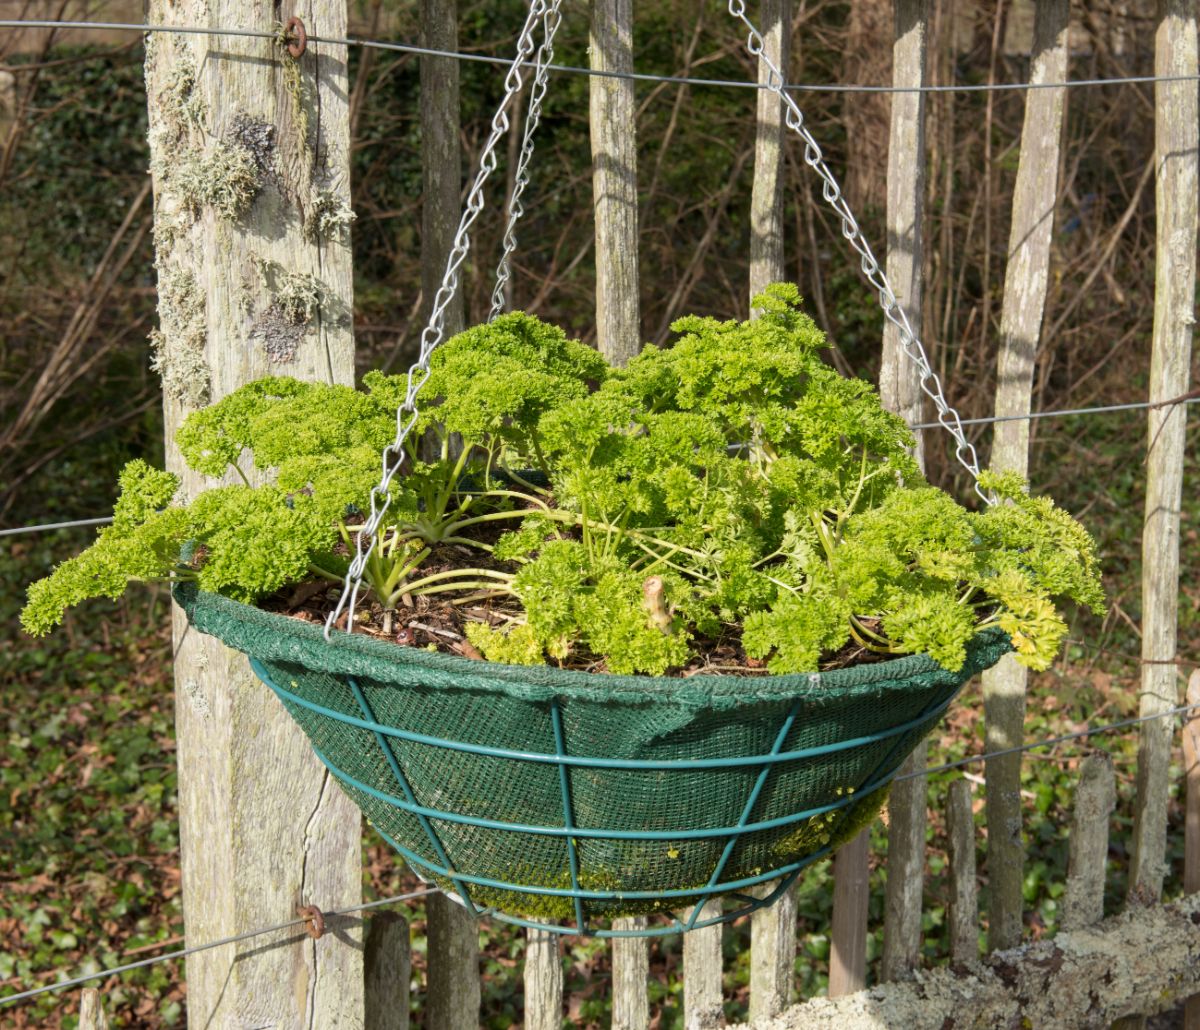 Parsley planted in a hanging basket